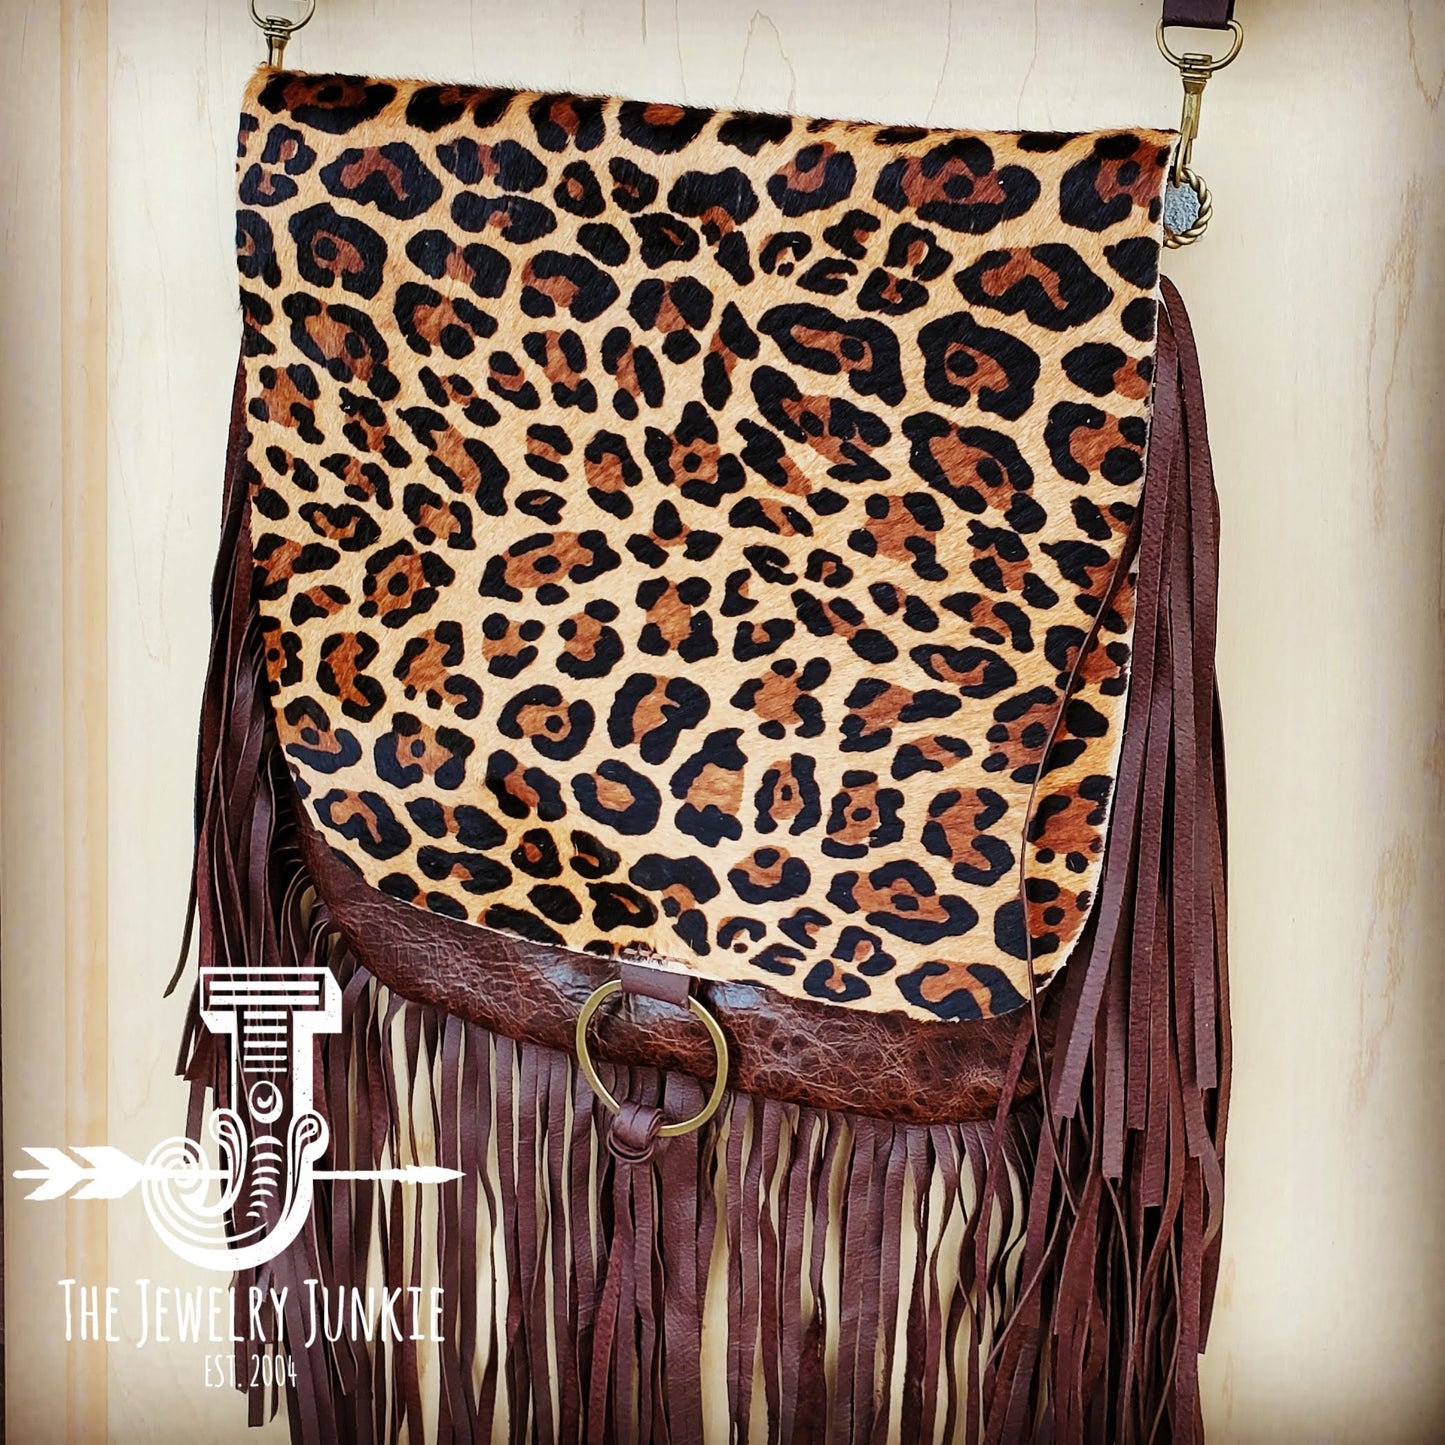 Hair on Hide Leopard and Leather Crossbody Bag Geronimo 7912 